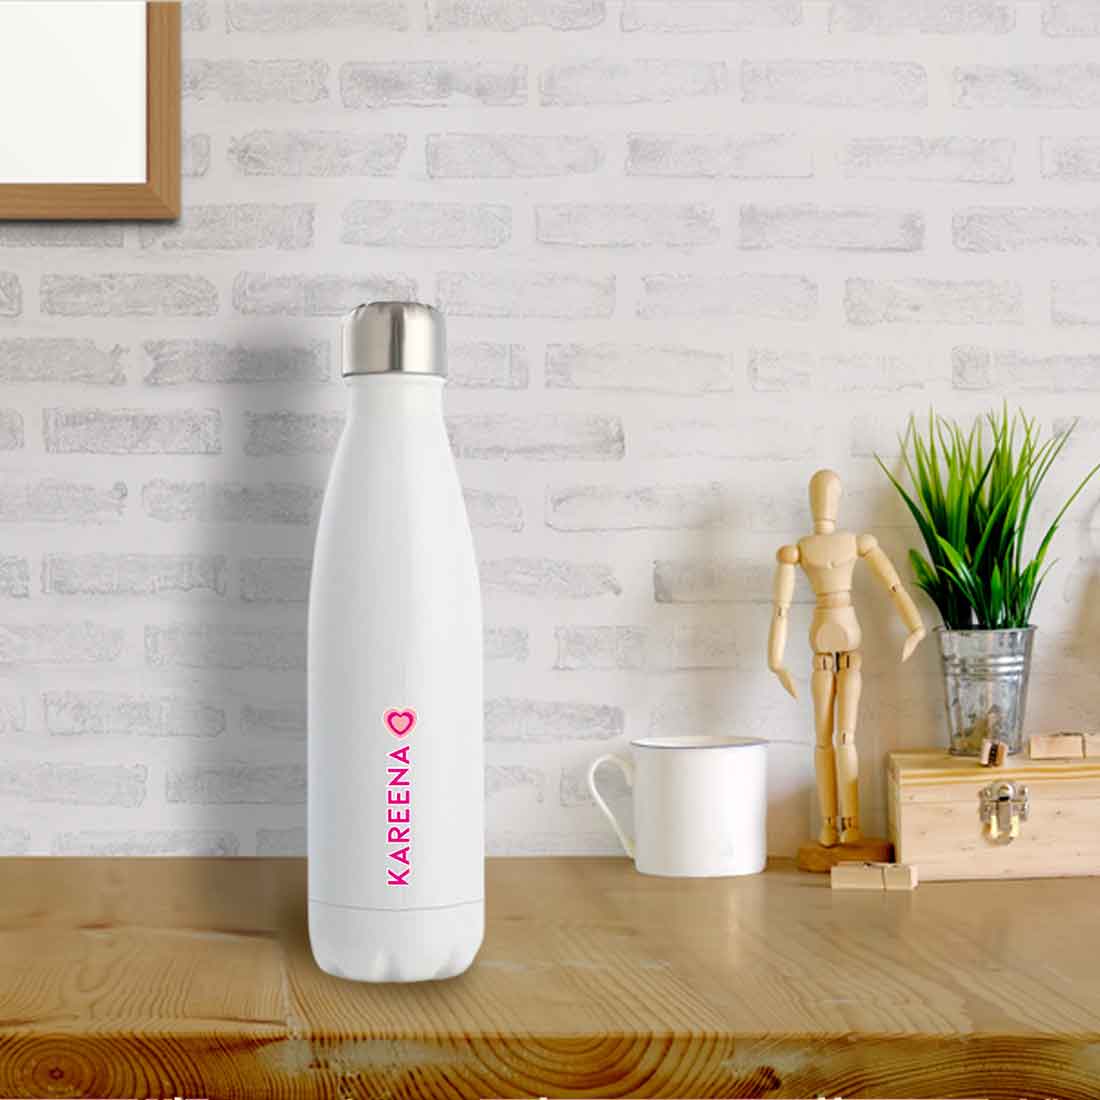 Water Bottle with Name Printed - Stainless Steel Insulated Water Bottles 500ml